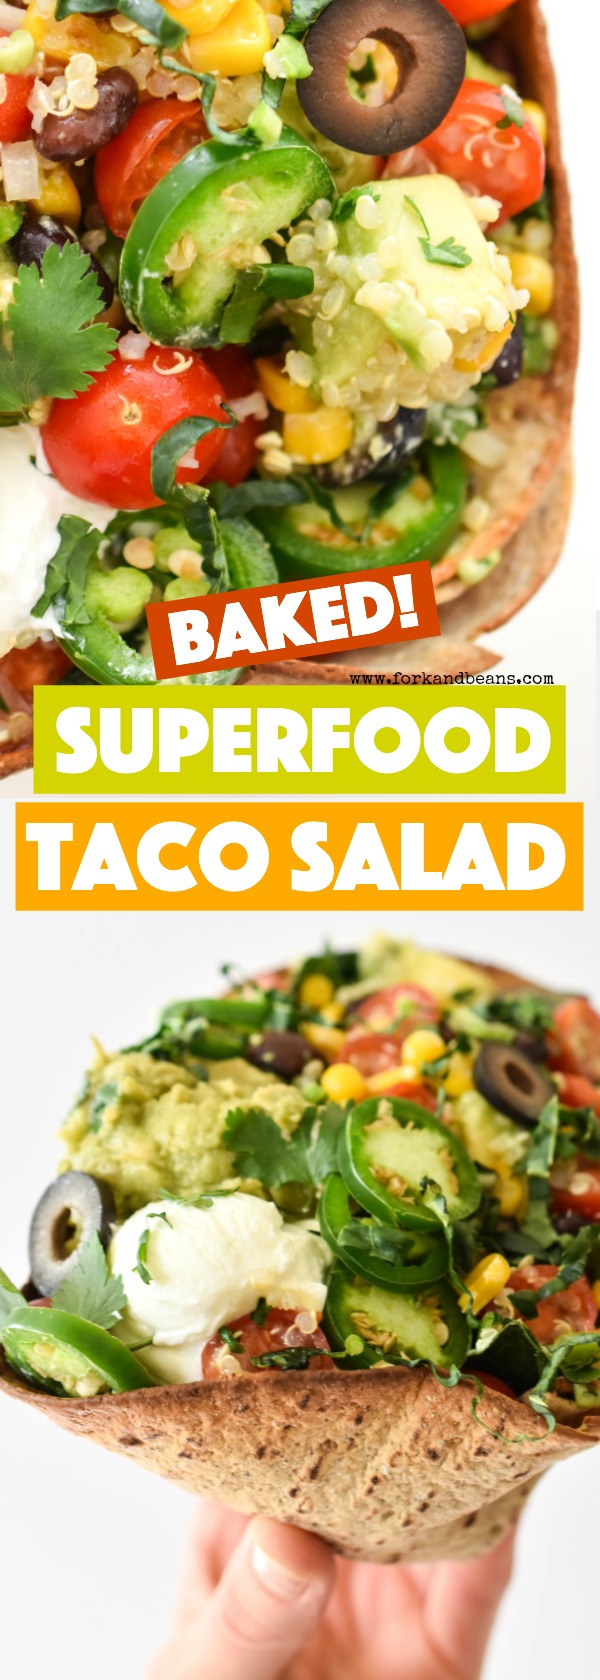 Superfood Baked Taco Salads with tons of good-for-you ingredients surrounded by a baked FlatOut wraps